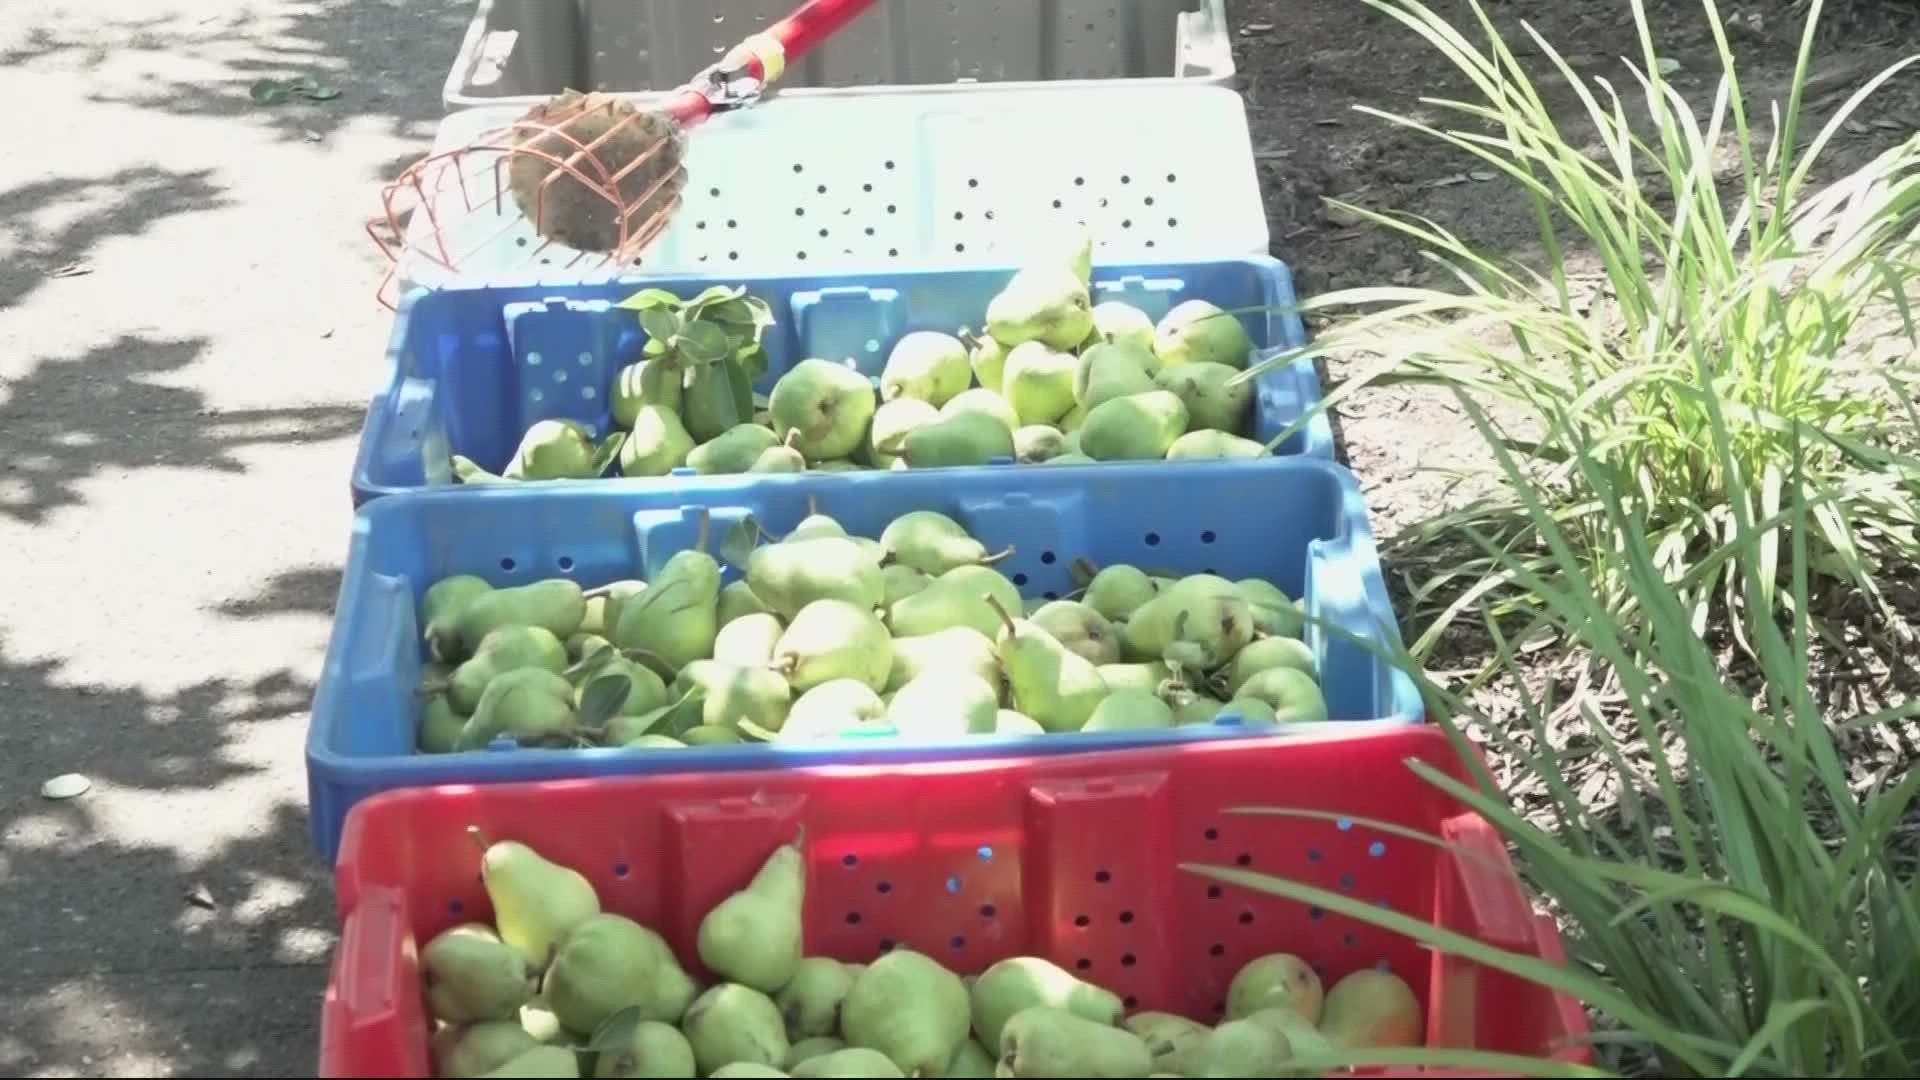 The Portland Fruit Tree Project has been providing vulnerable communities fresh fruit for 15 years. The nonprofit is looking for donations and volunteers.